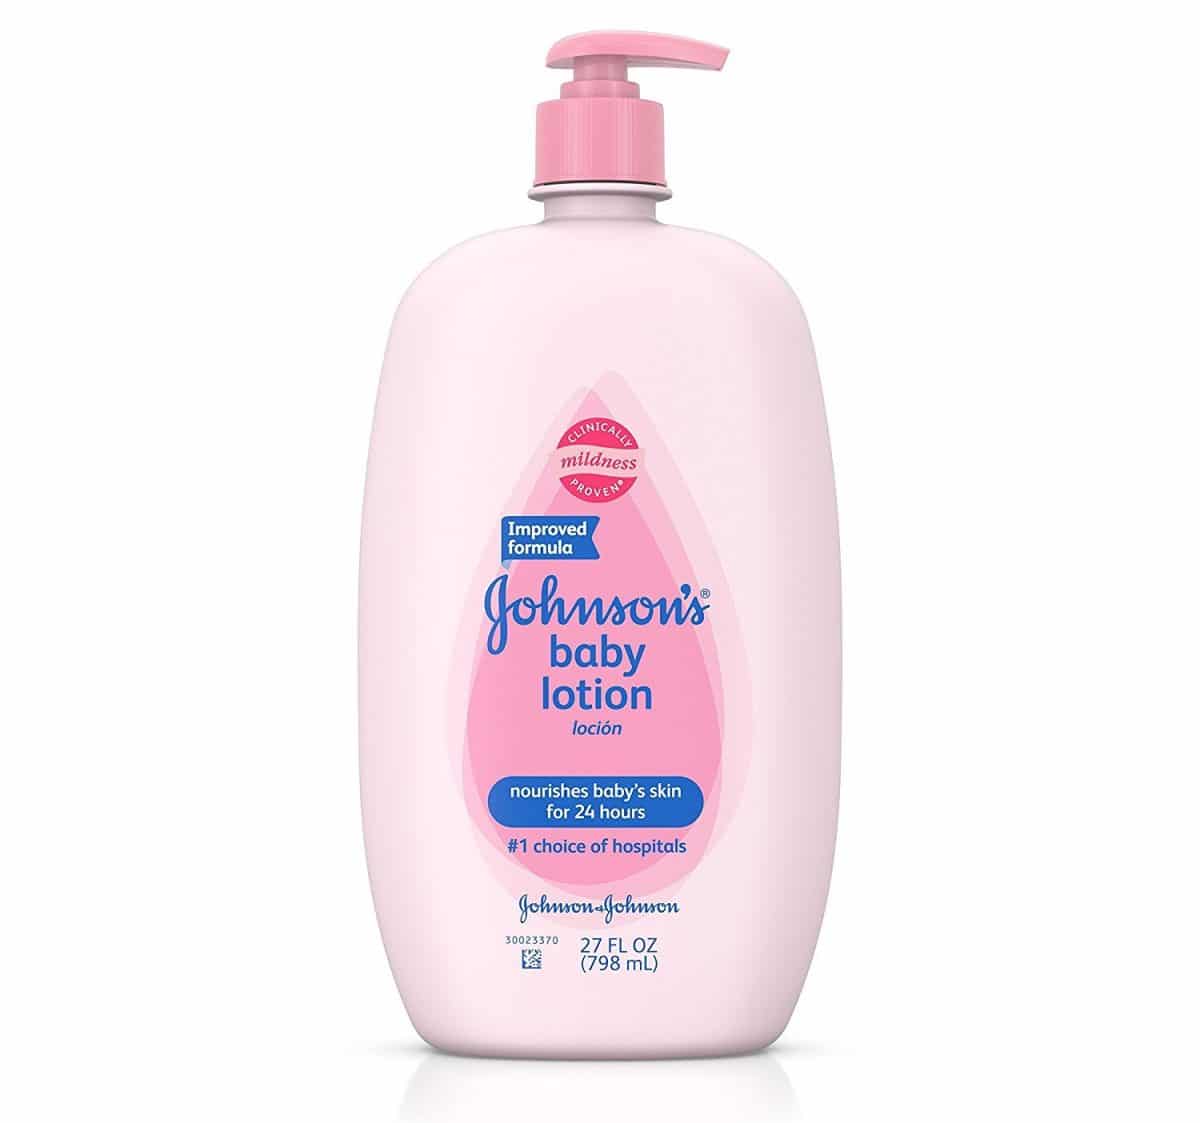 The 10 Best Baby Lotions to Buy 2020